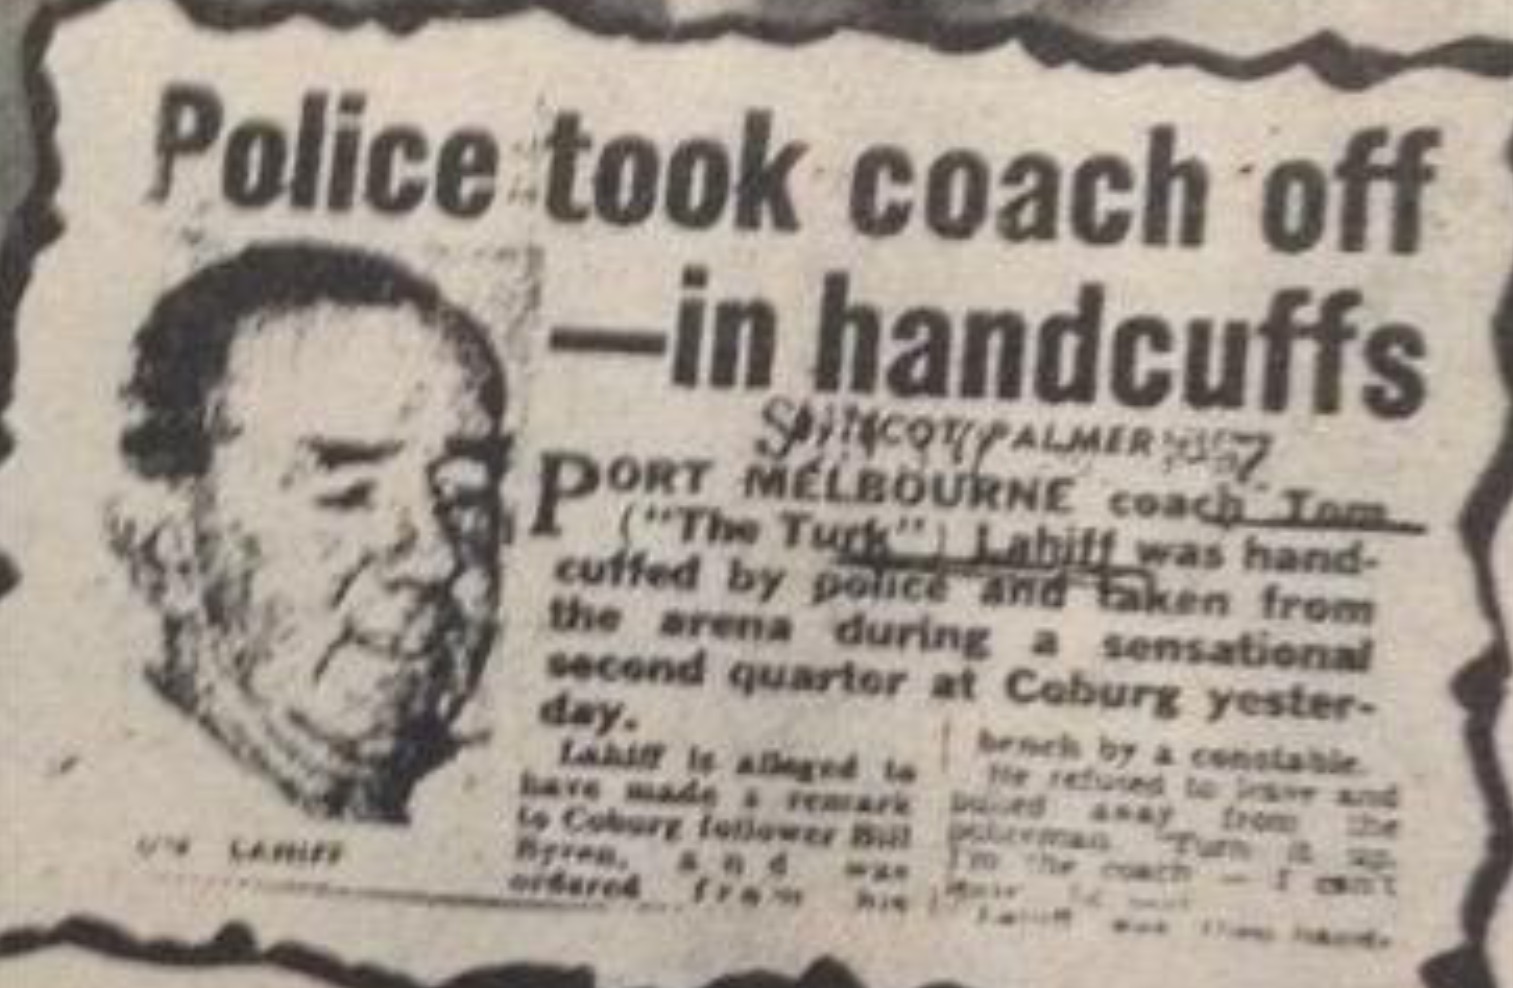 The day the footy coach was handcuffed